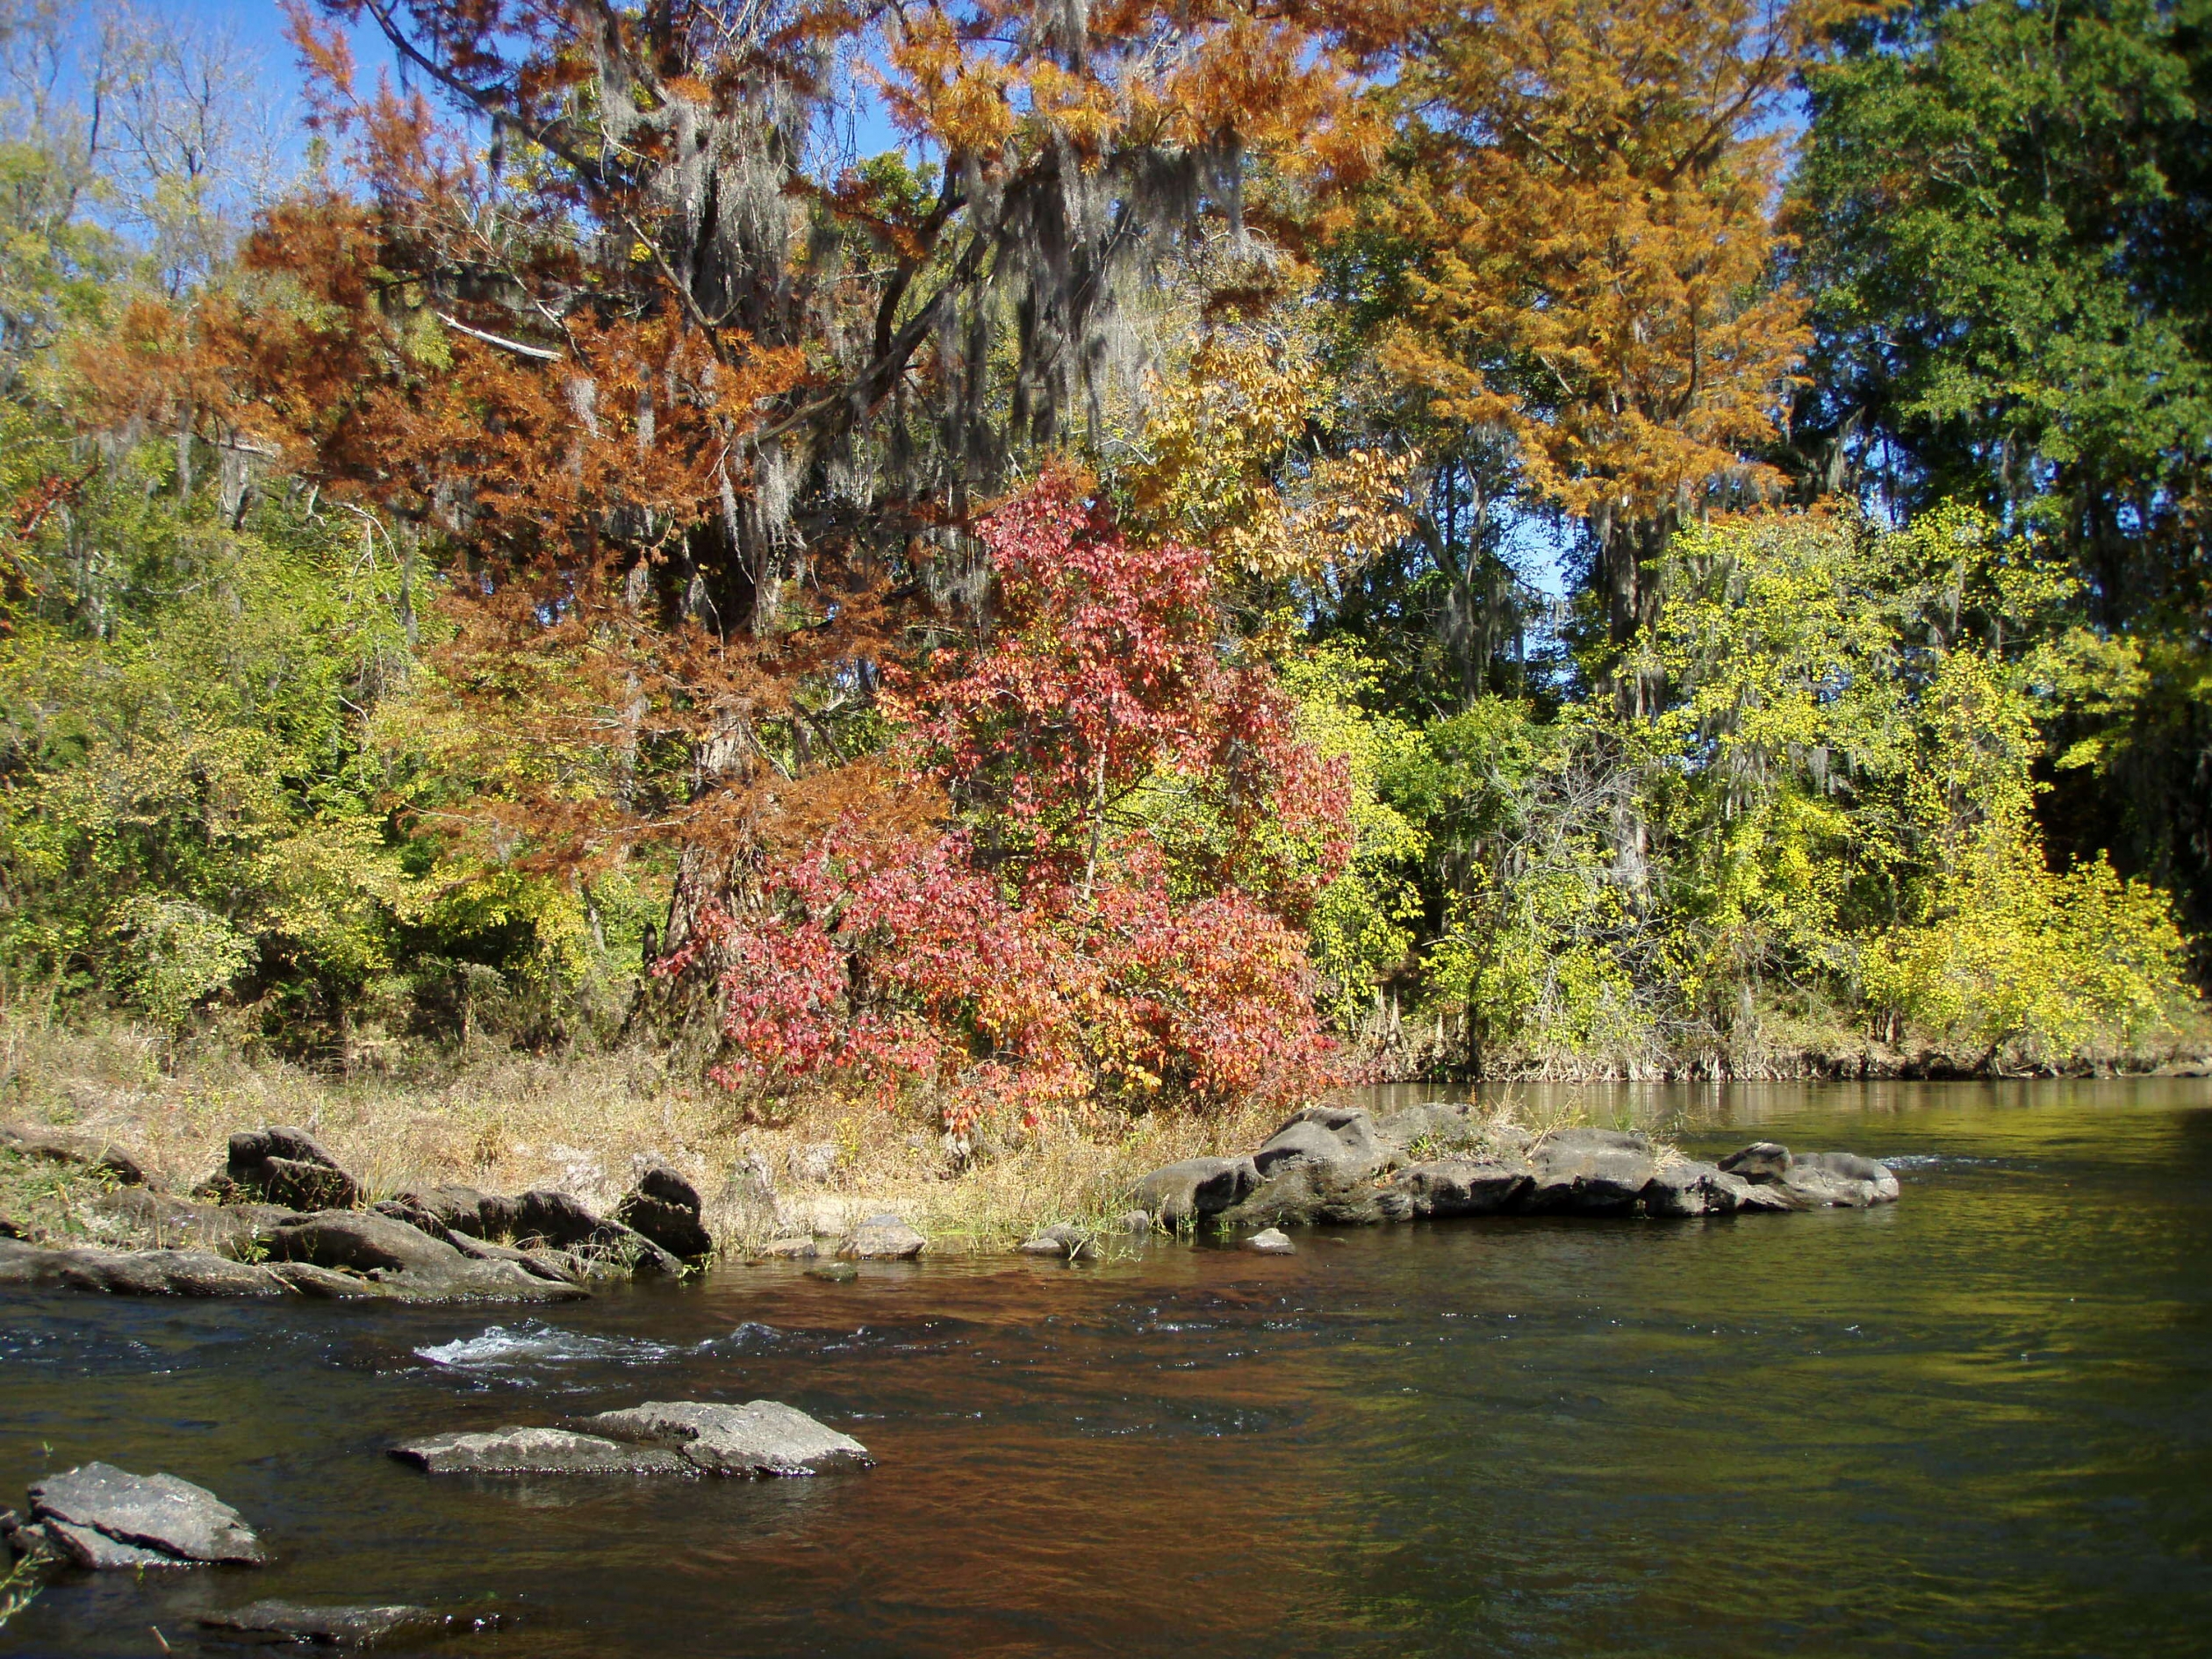 Red, orange, and green leaves on trees lining the banks of the Coosa River along the Alabama Scenic River Trail